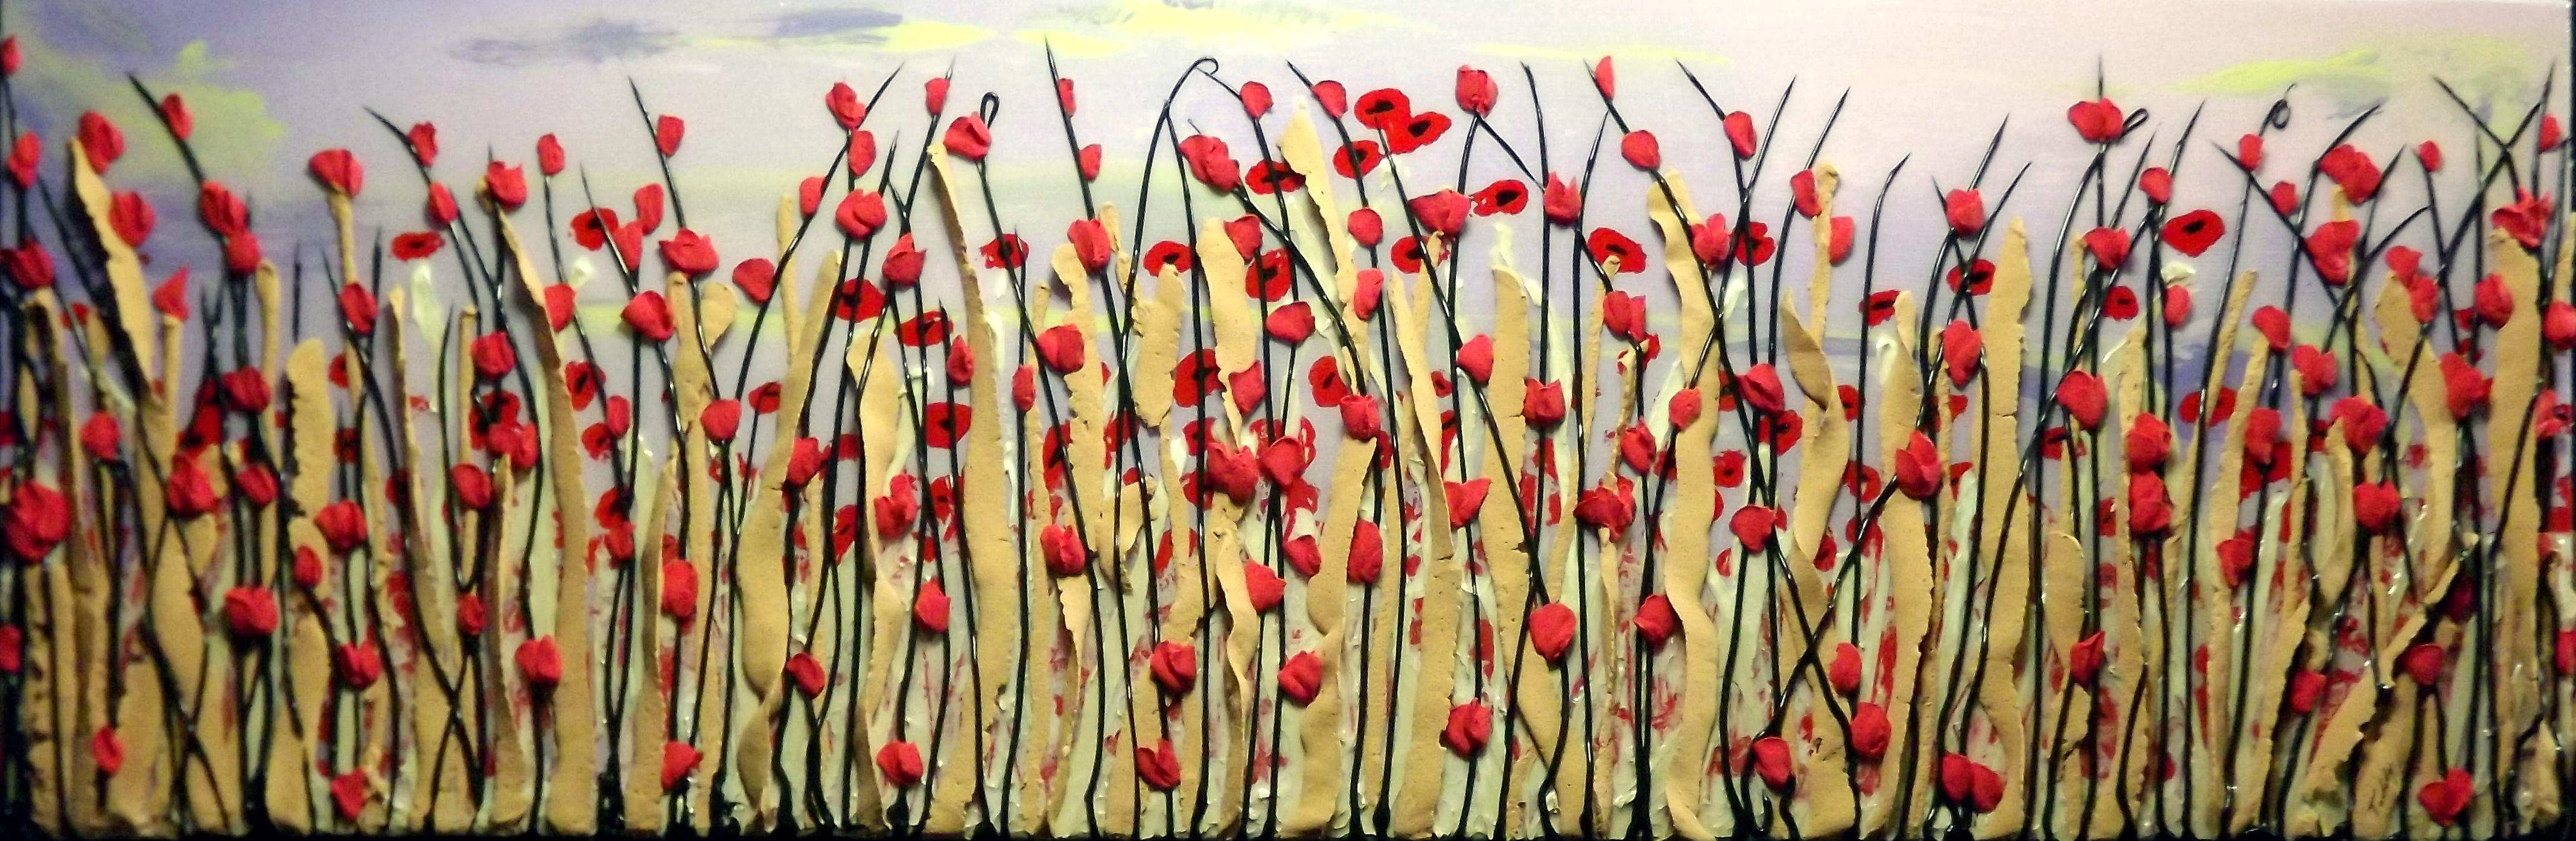 Red Poppies, Mixed Media on Canvas - Mixed Media Art by Teddy Brown